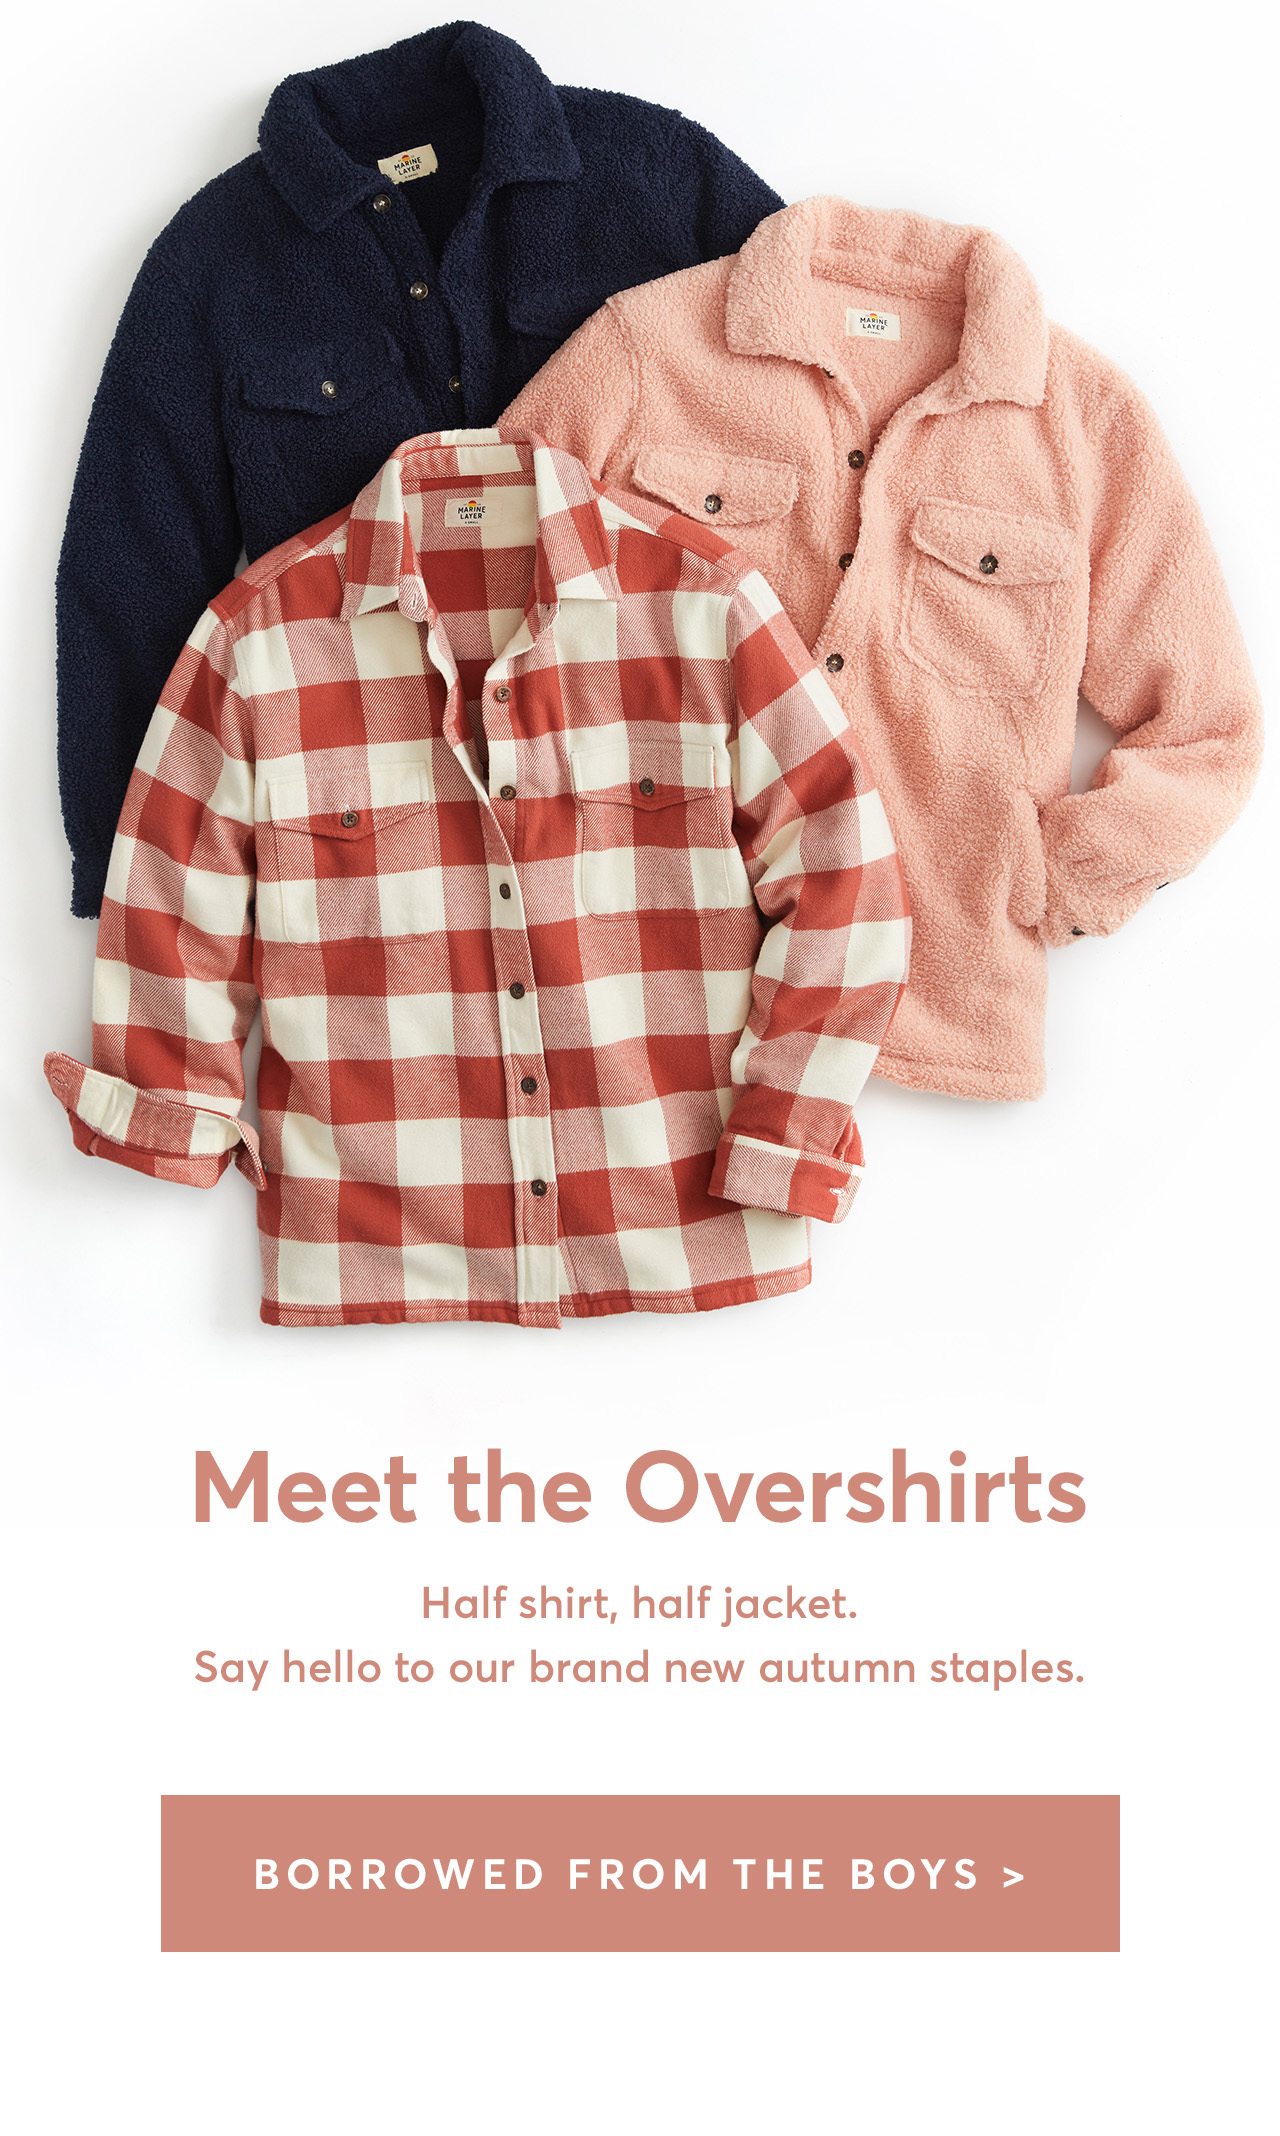 Overshirts coming in hot (!)